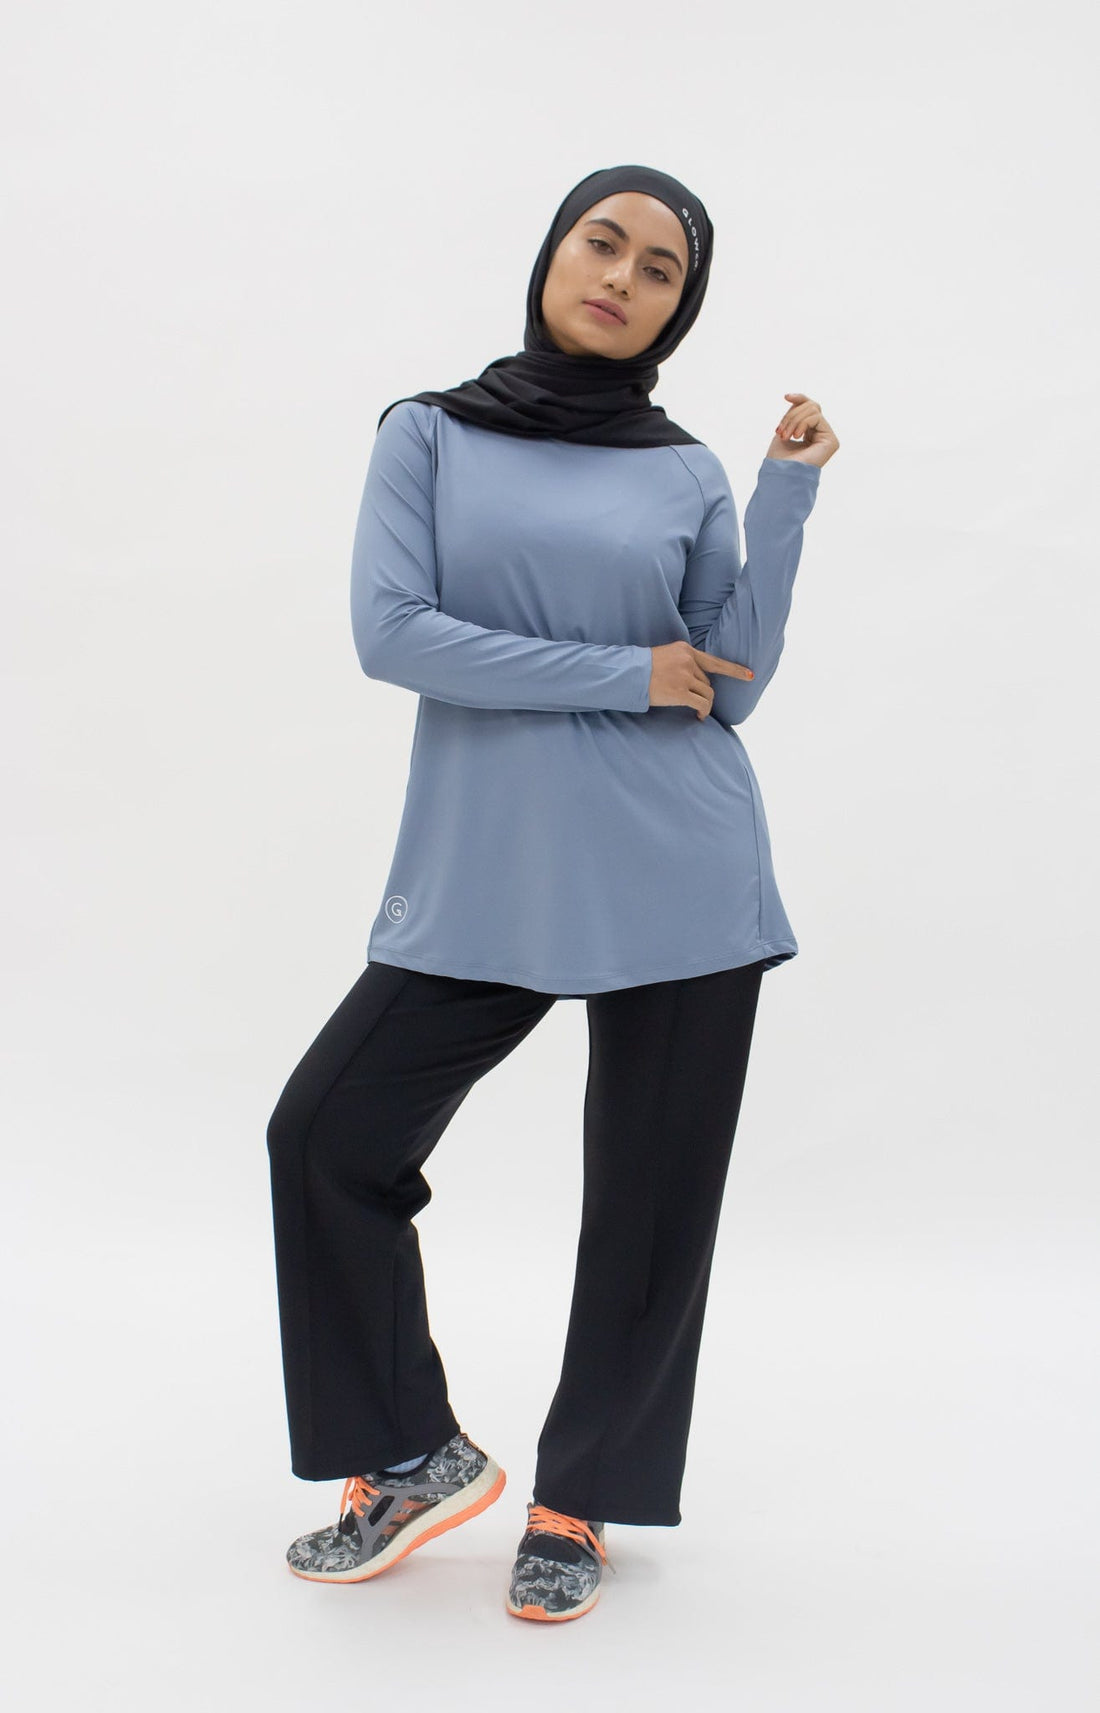 Sports Tops GLOWco Exclusive Pleated Top in Sky Blue